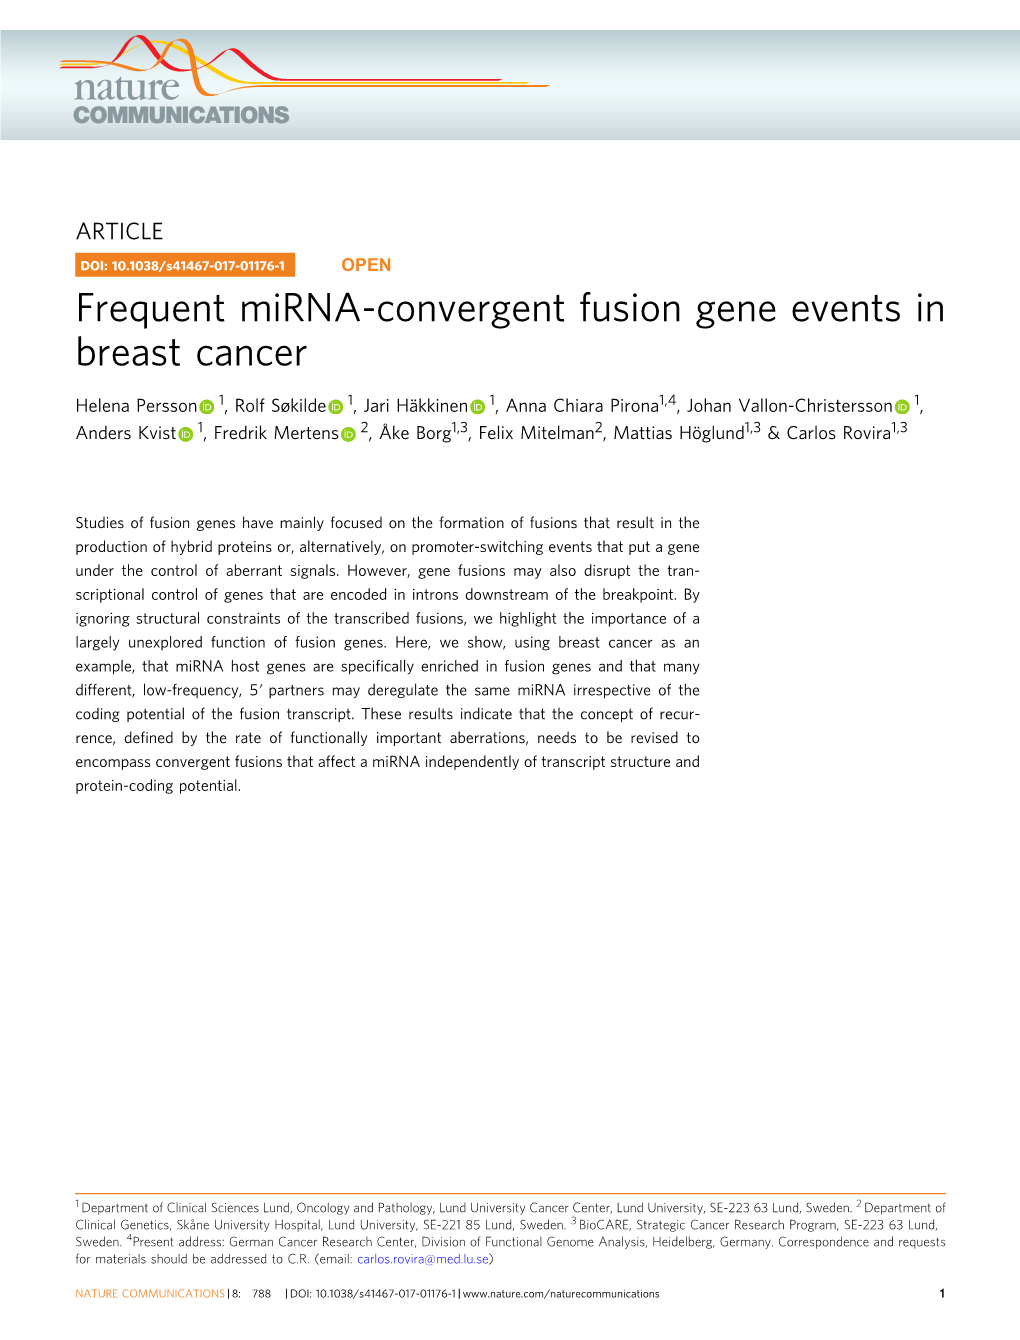 Frequent Mirna-Convergent Fusion Gene Events in Breast Cancer